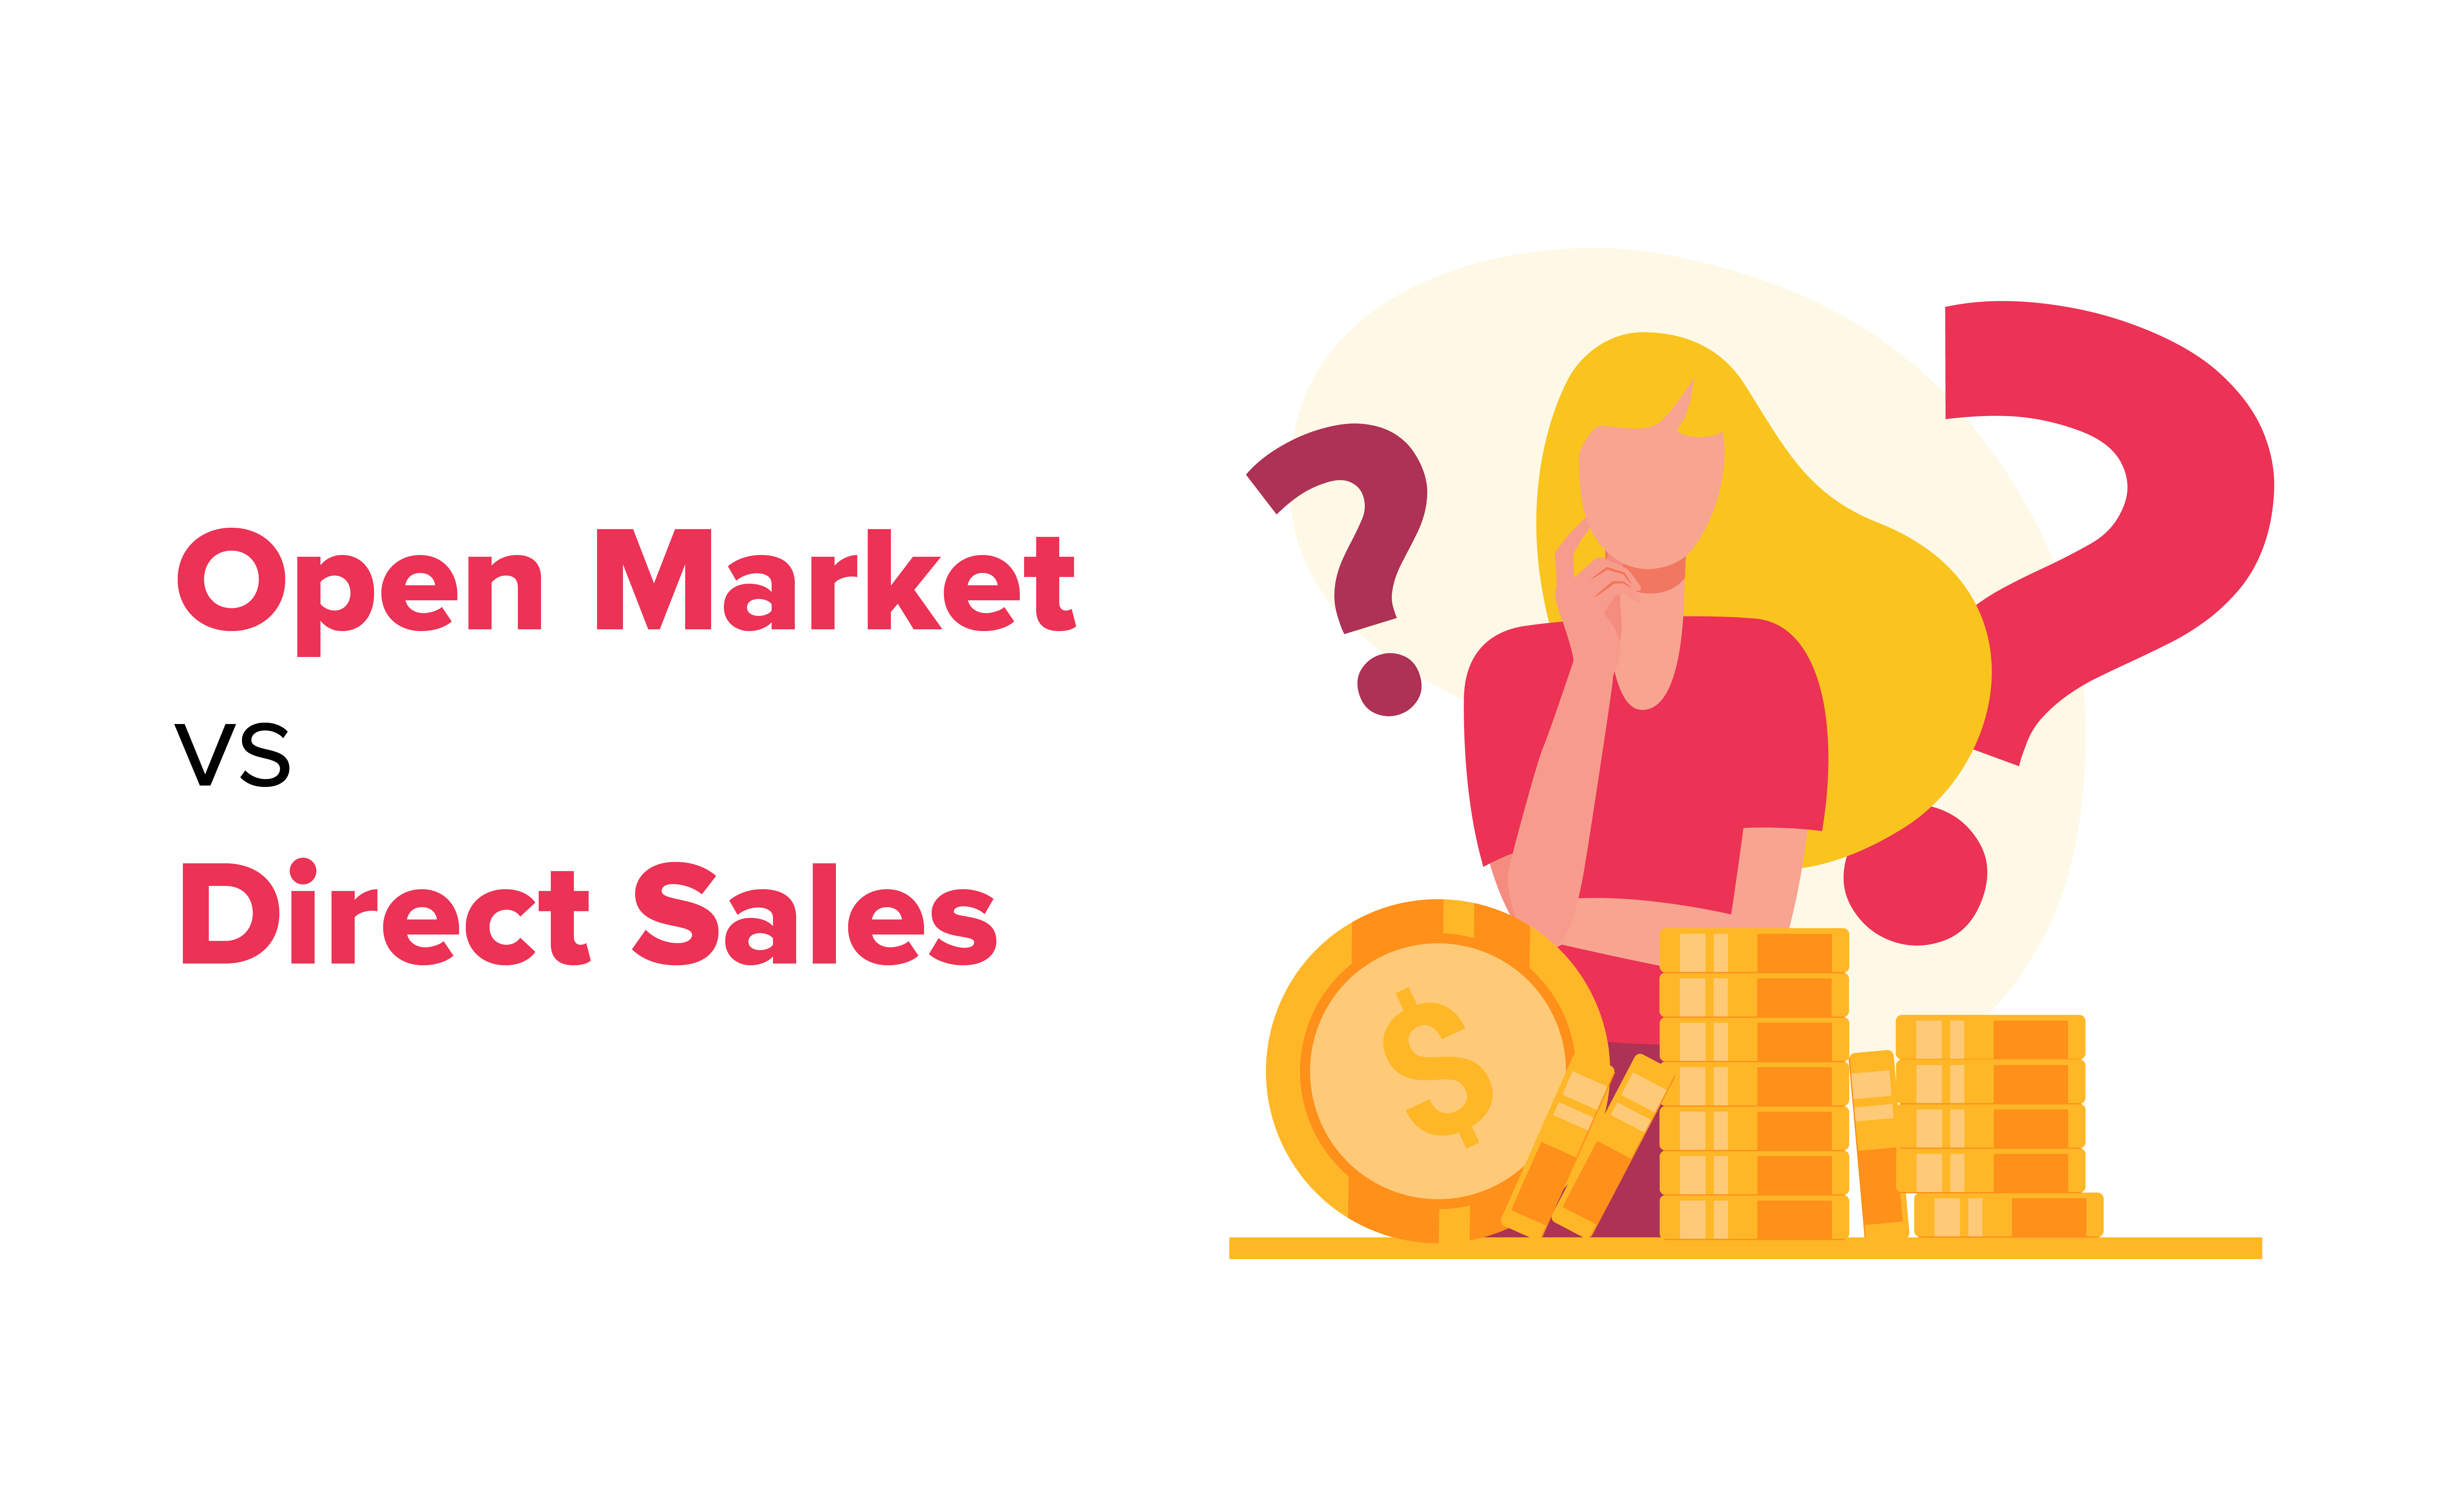 Balance between Open Market optimization and protecting Direct Sales